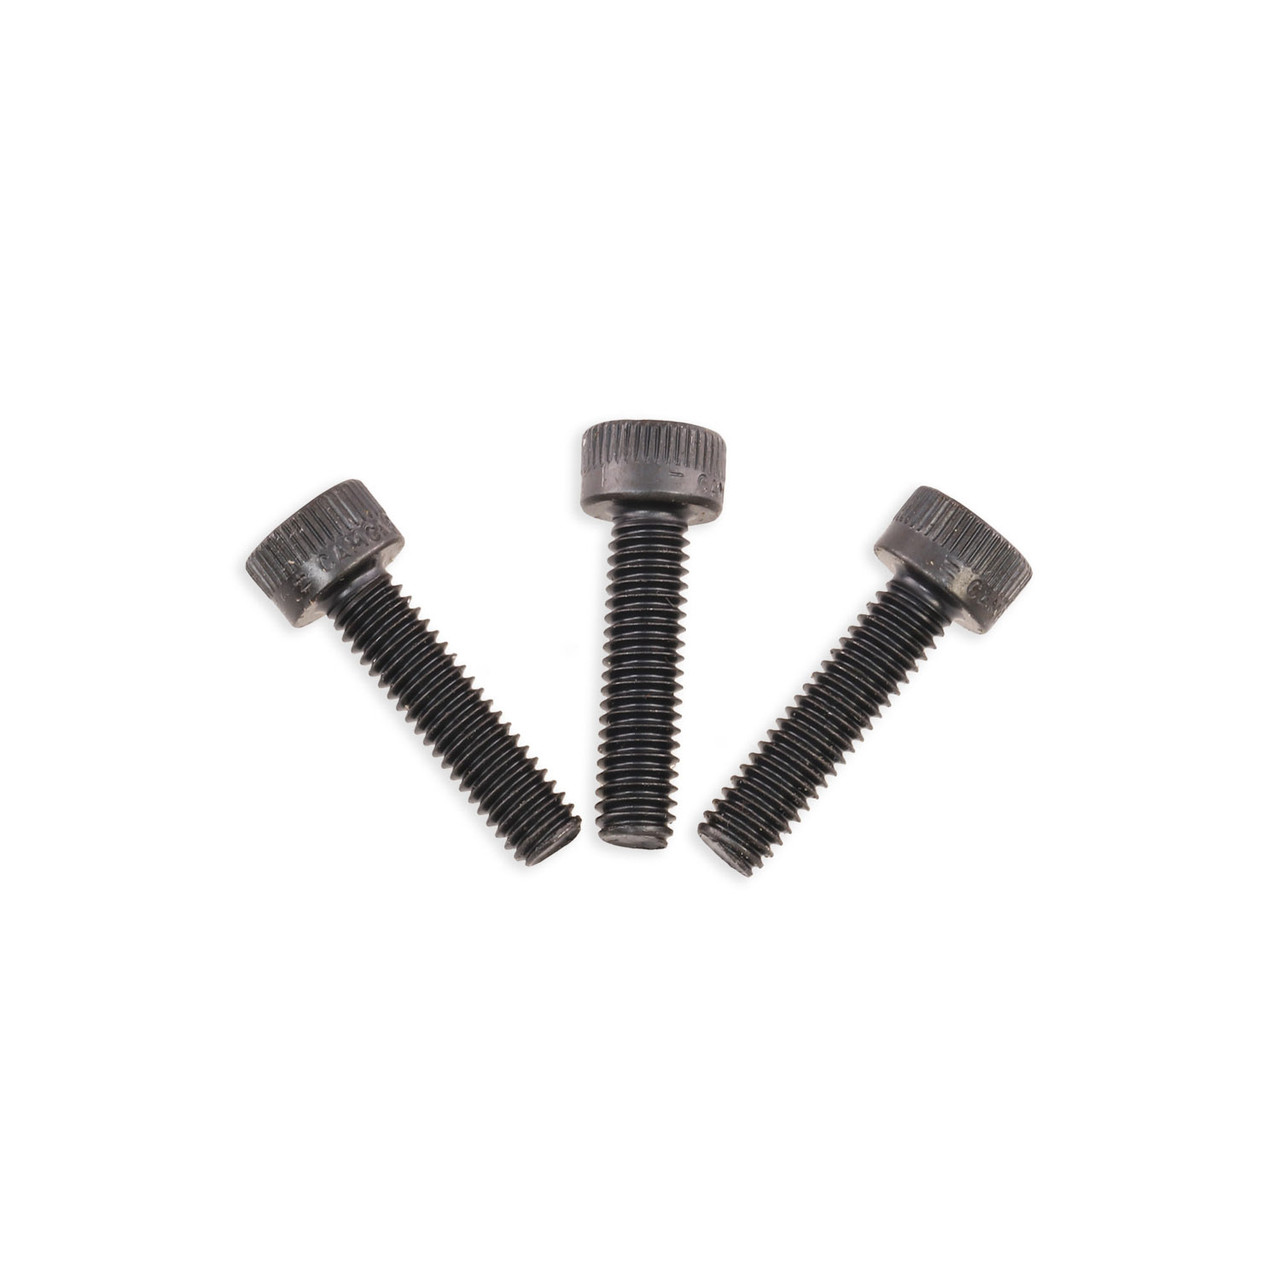 Hurricane, Replacement Screws for Chuck Arbor, 3 Pack